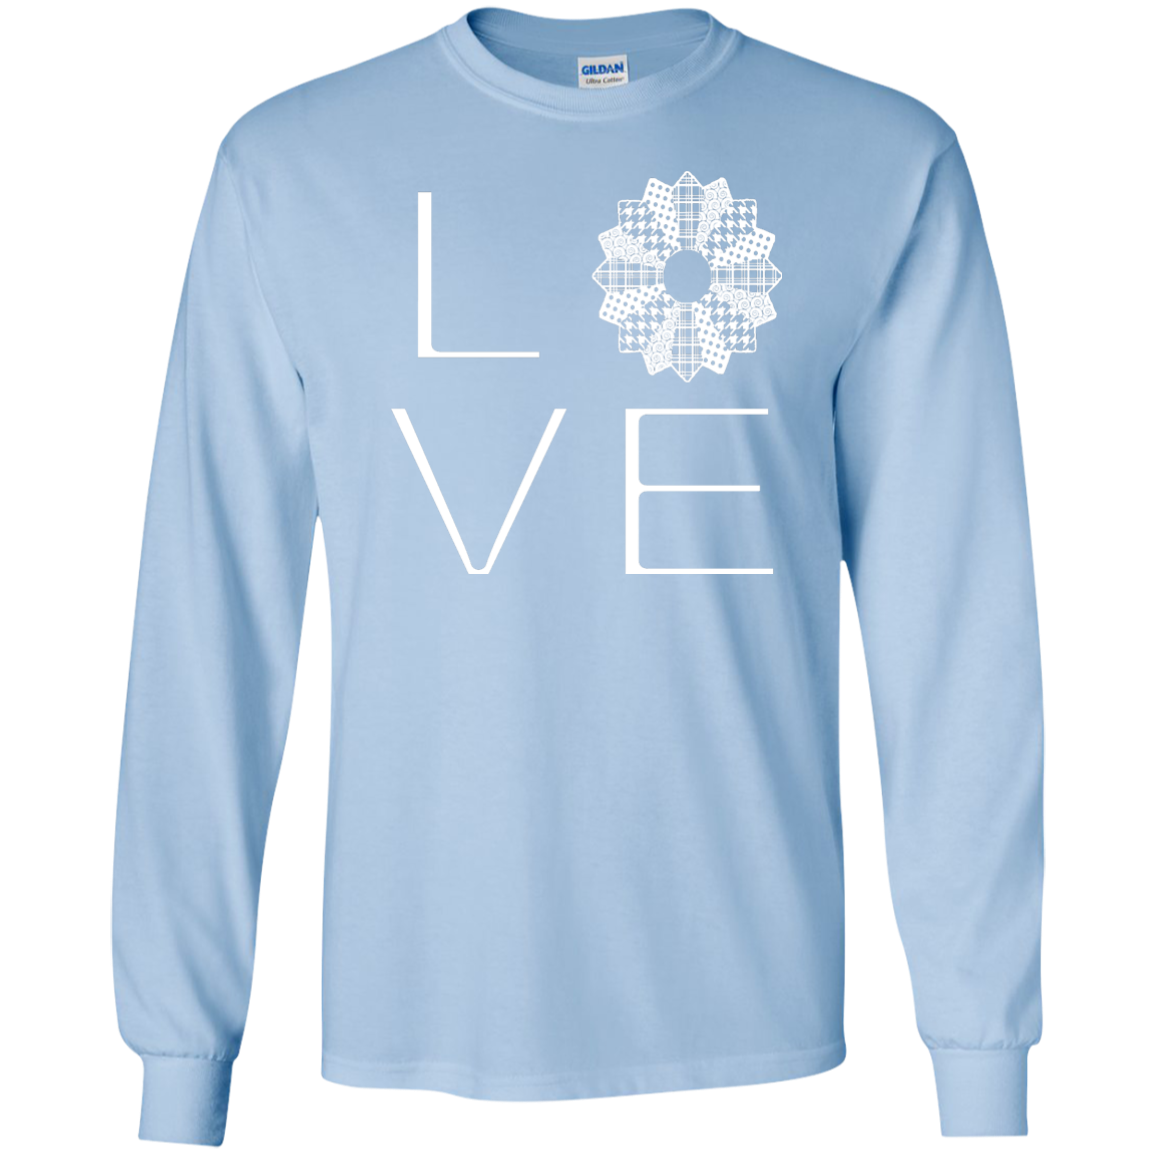 LOVE Quilting LS Ultra Cotton T-shirt - Crafter4Life - 7